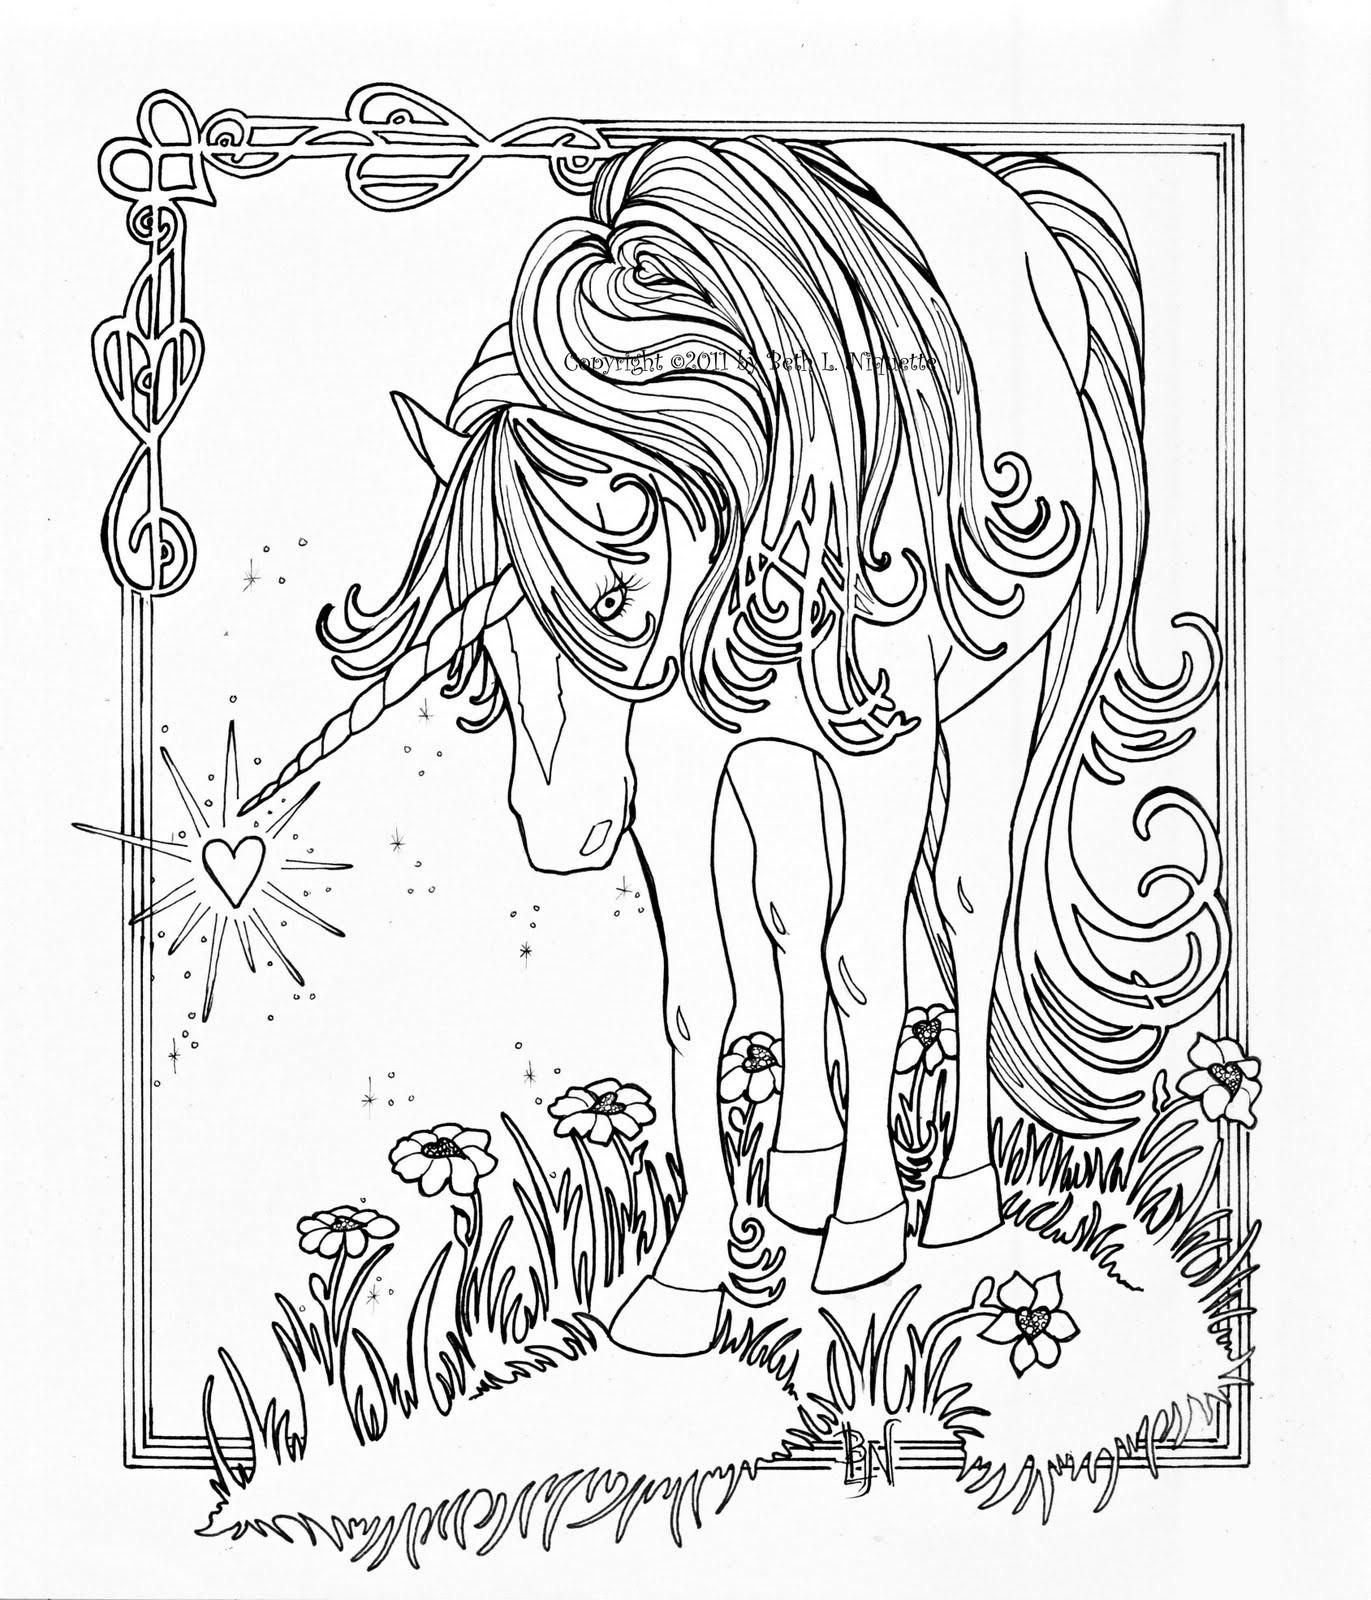 Free Unicorn Coloring Pages For Adults
 Beth s Artworx August 2011